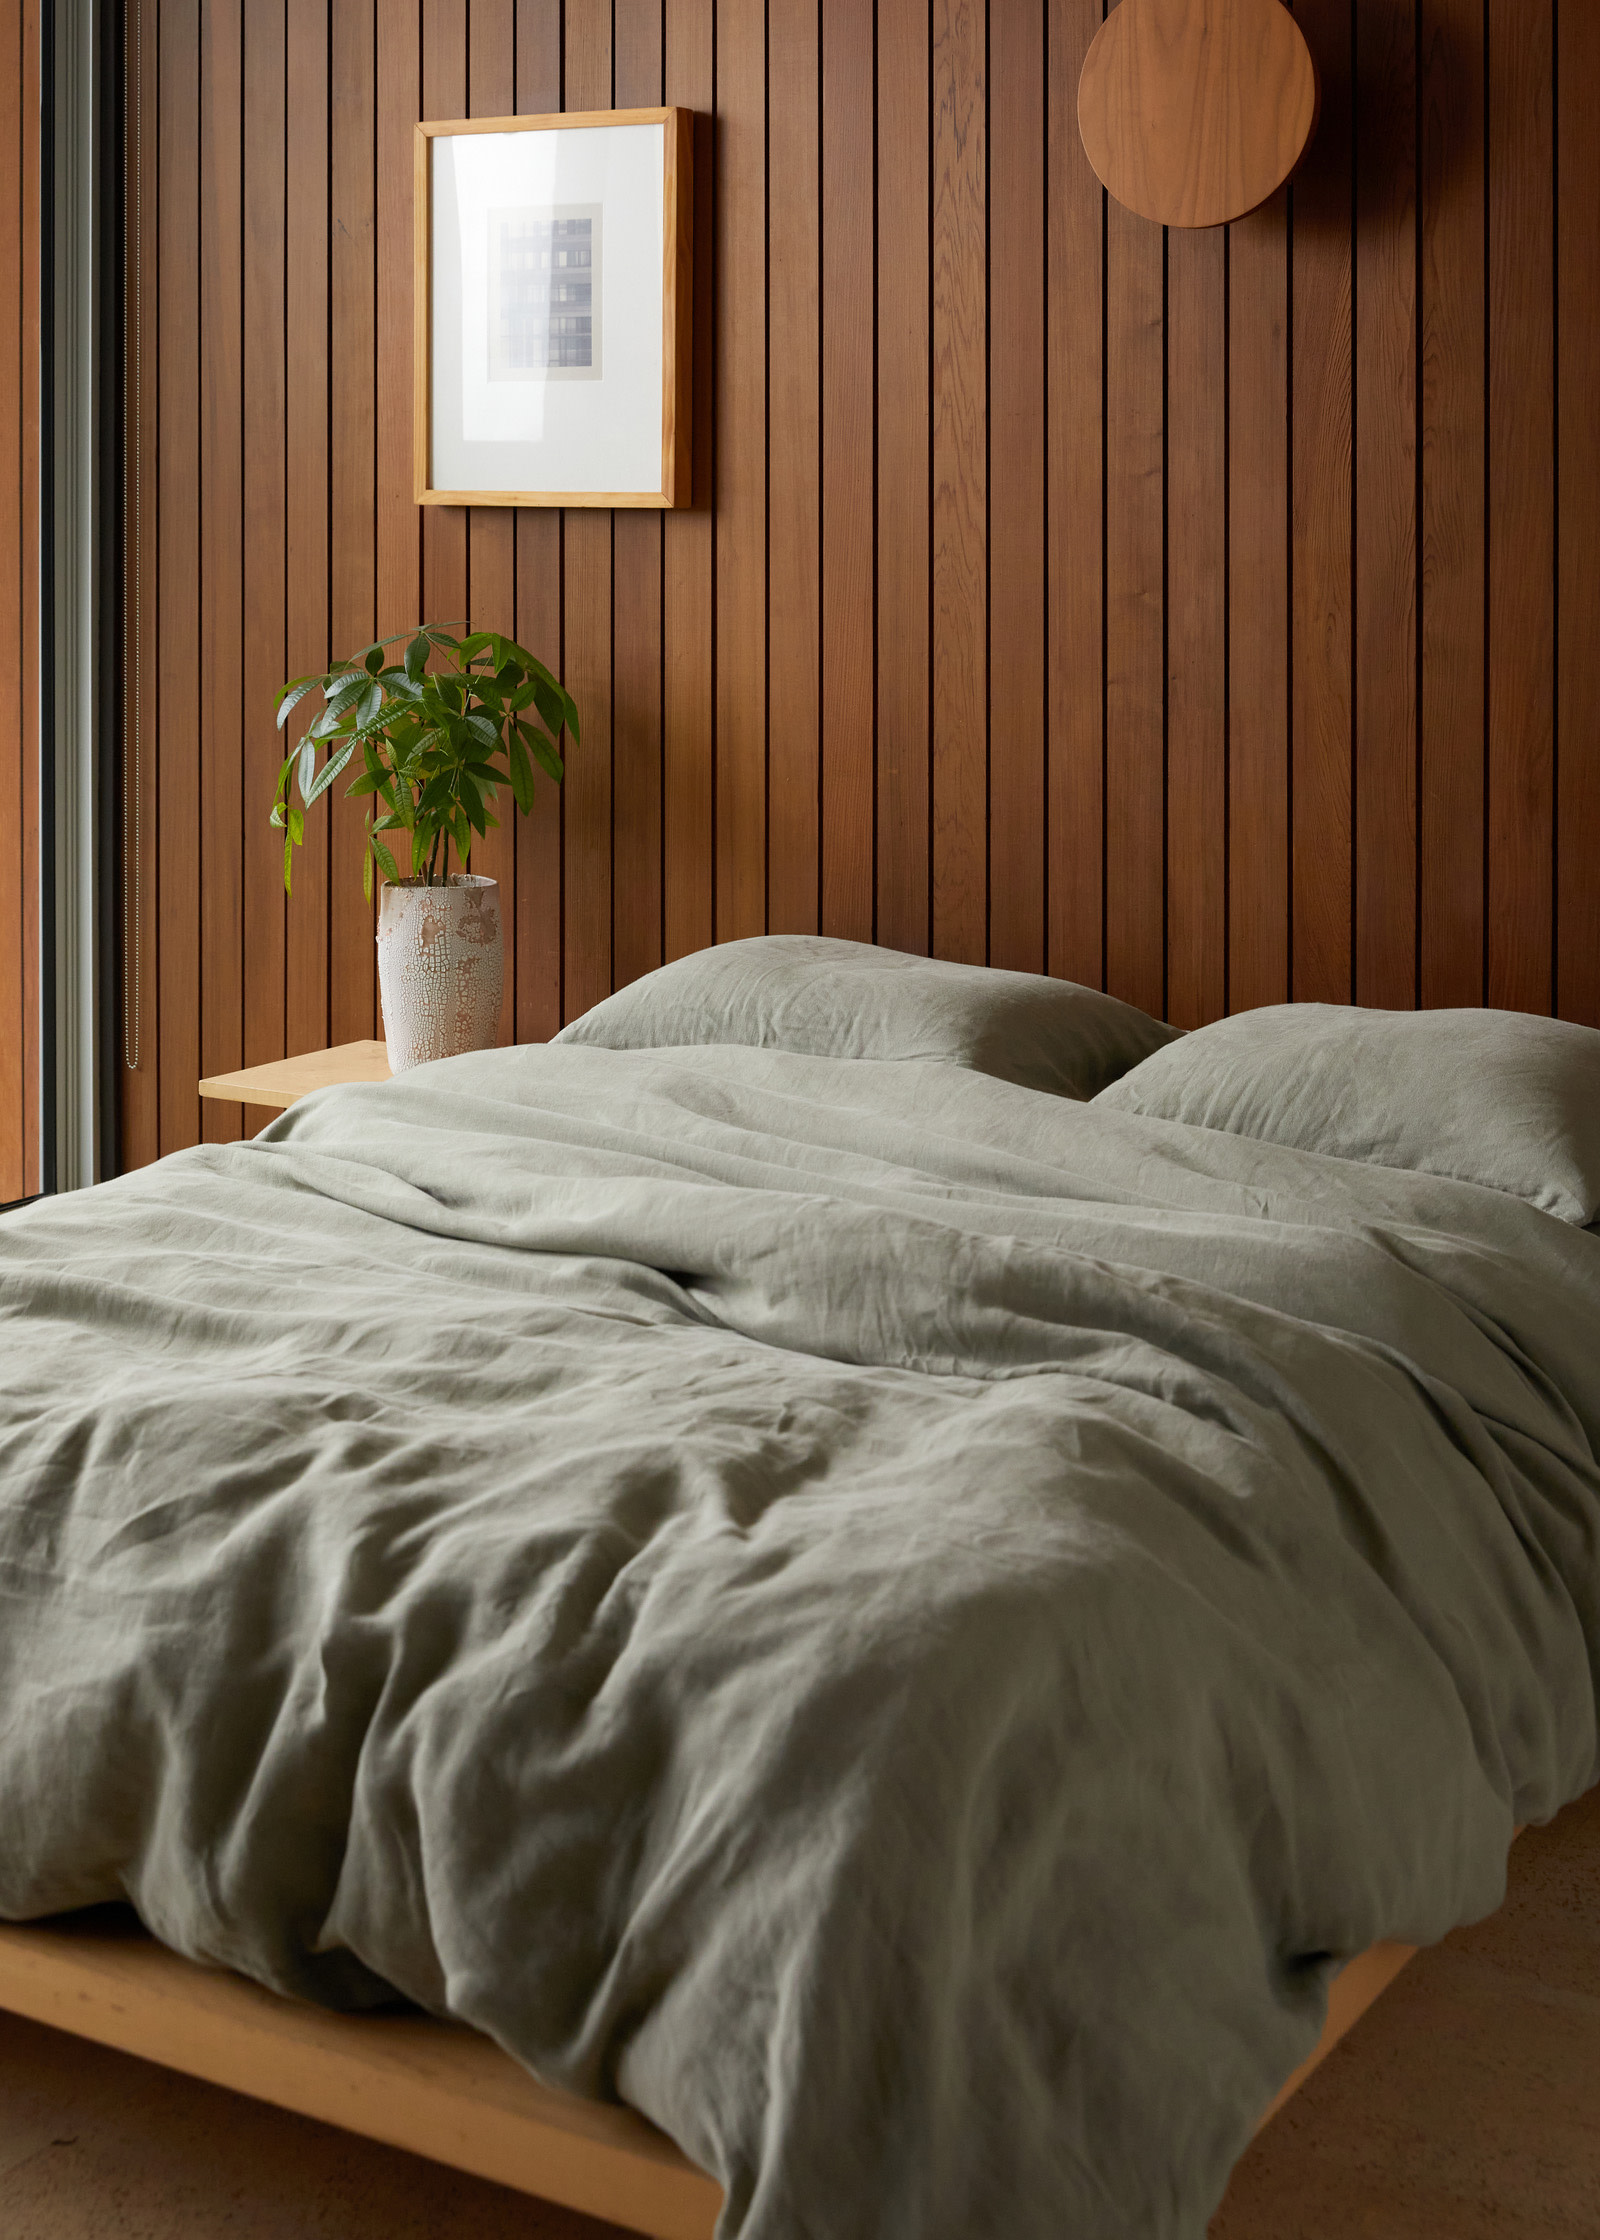 A bed with moss green linen sheets